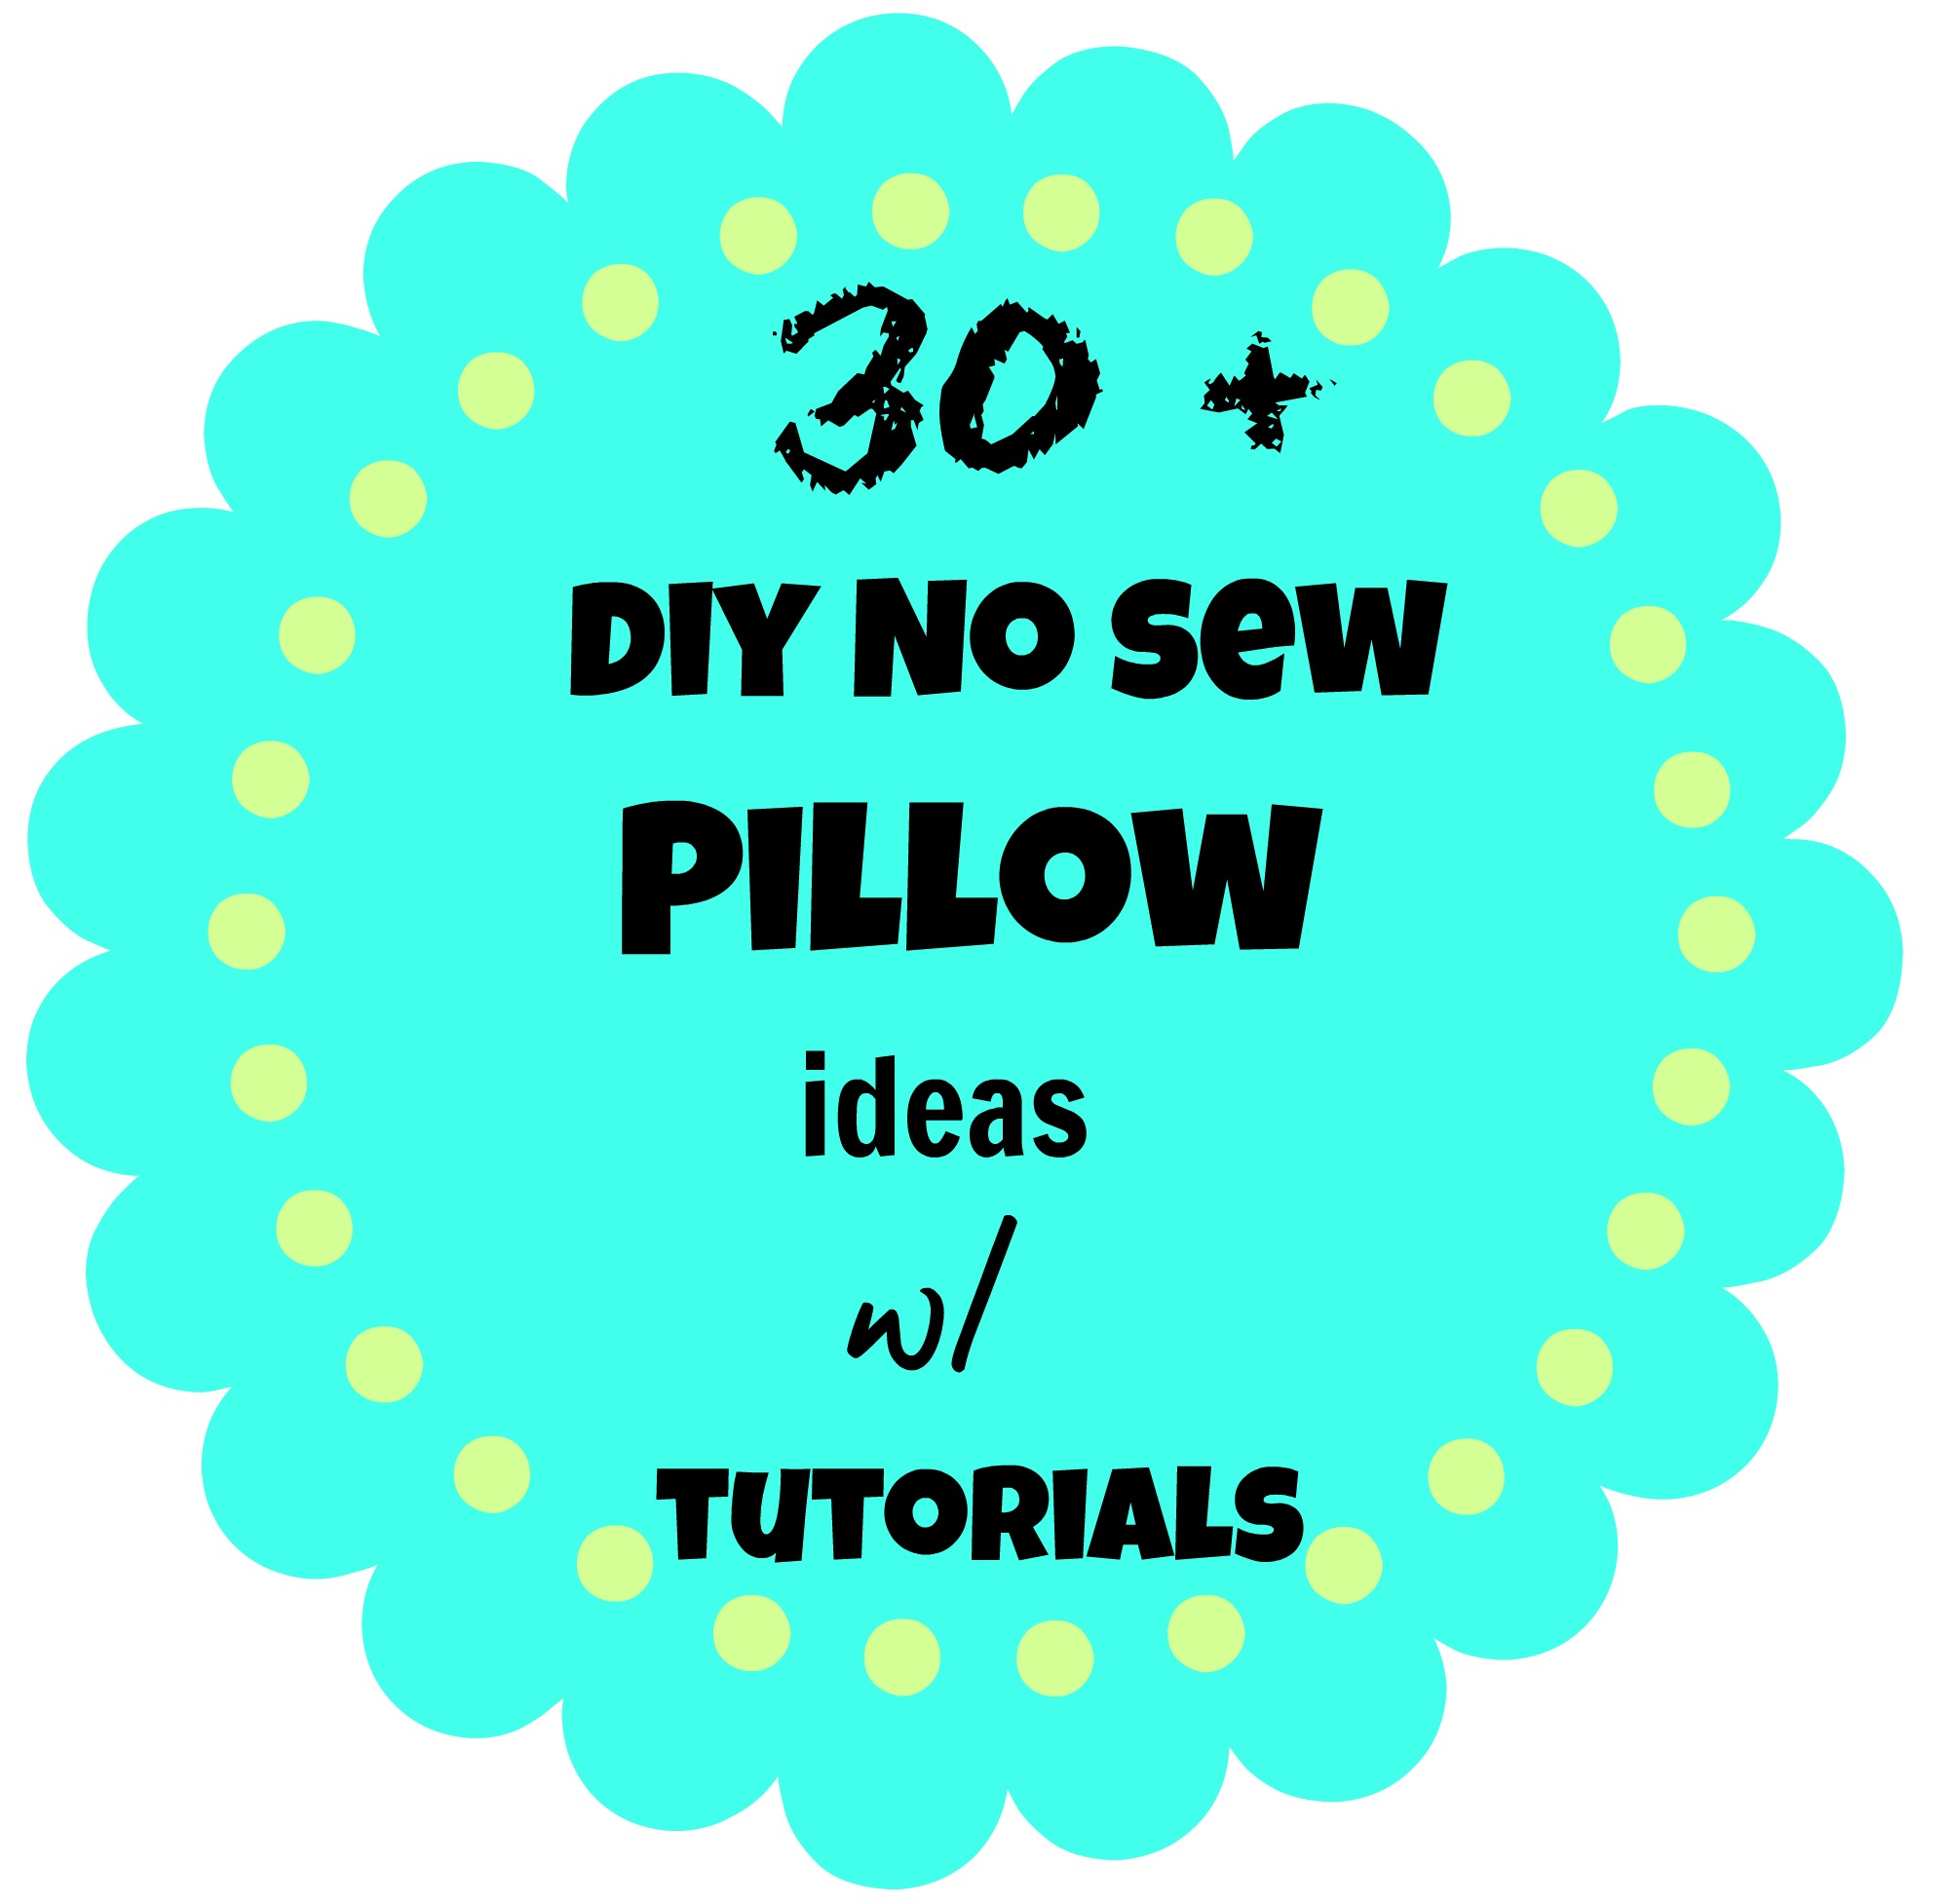 How  homemade tarps sew of sewing Debbiedoo's a pillow ideas to out make no painters  no pillow